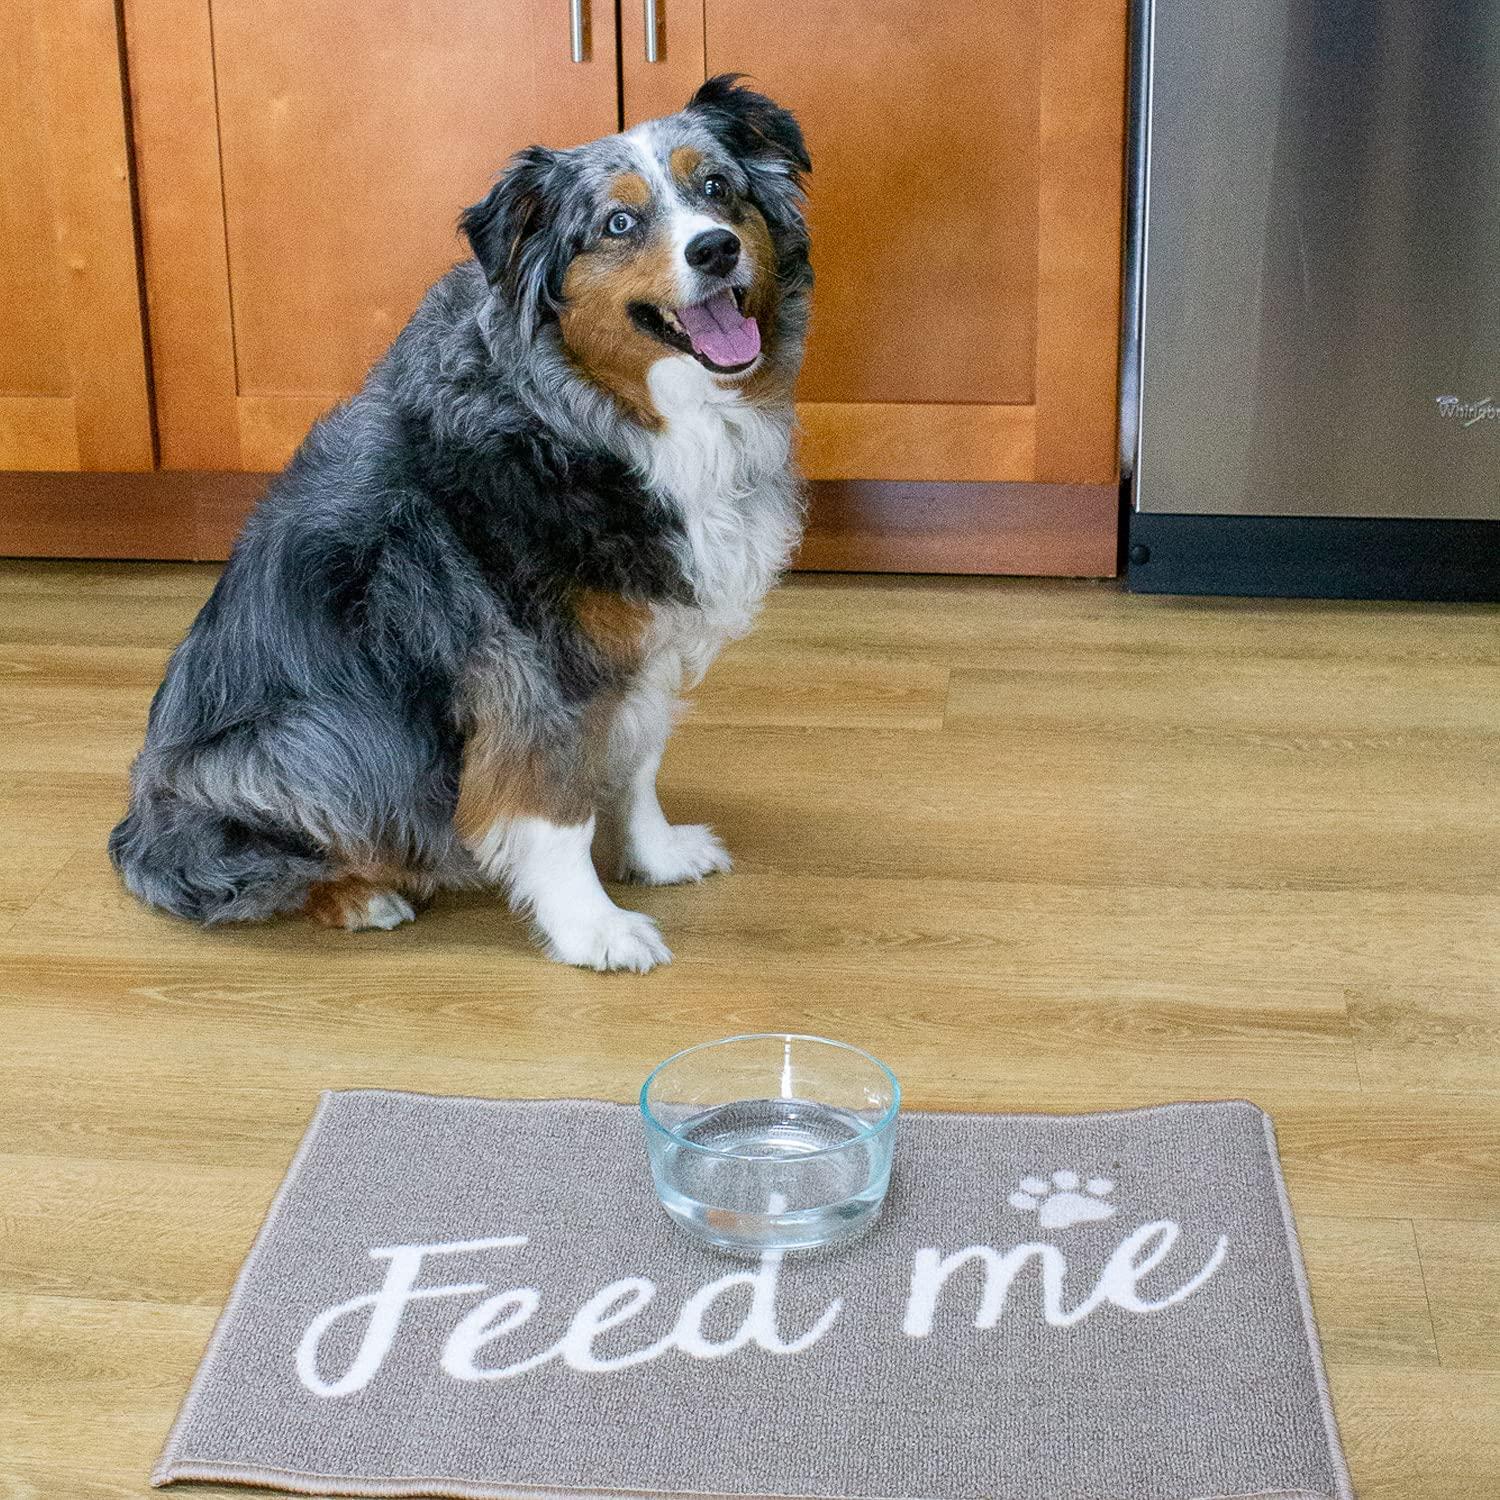 Arkwright Dog Food Mat (16x24 in) with Non-Slip Backing, Food Bowl Mat - 16 x 24 inch - Dinner